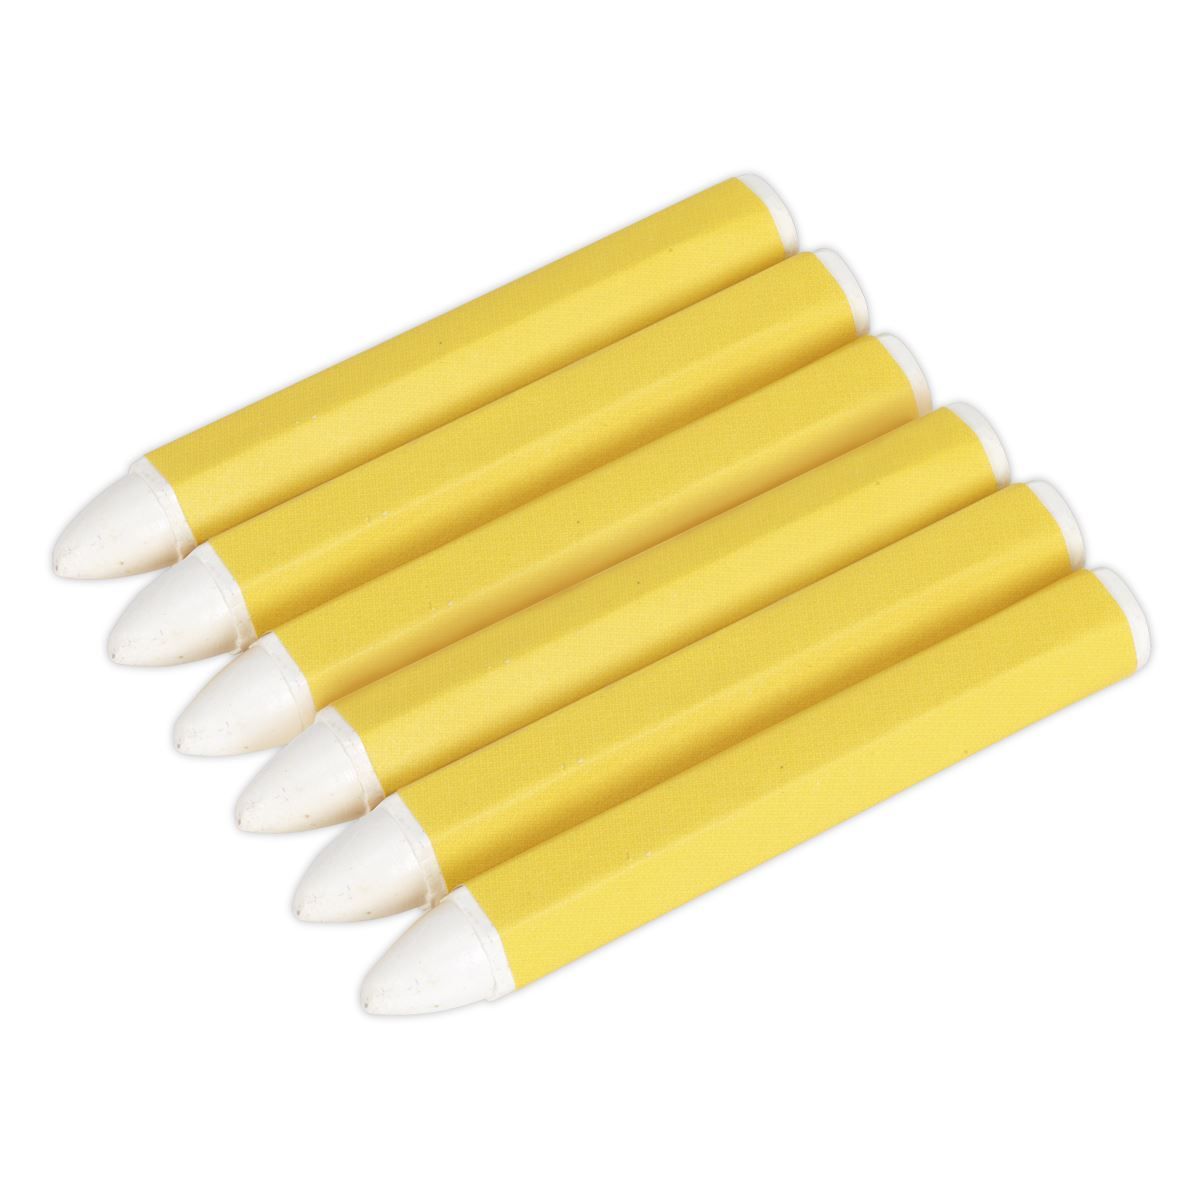 Sealey Tyre Marking Crayon - White Pack of 6